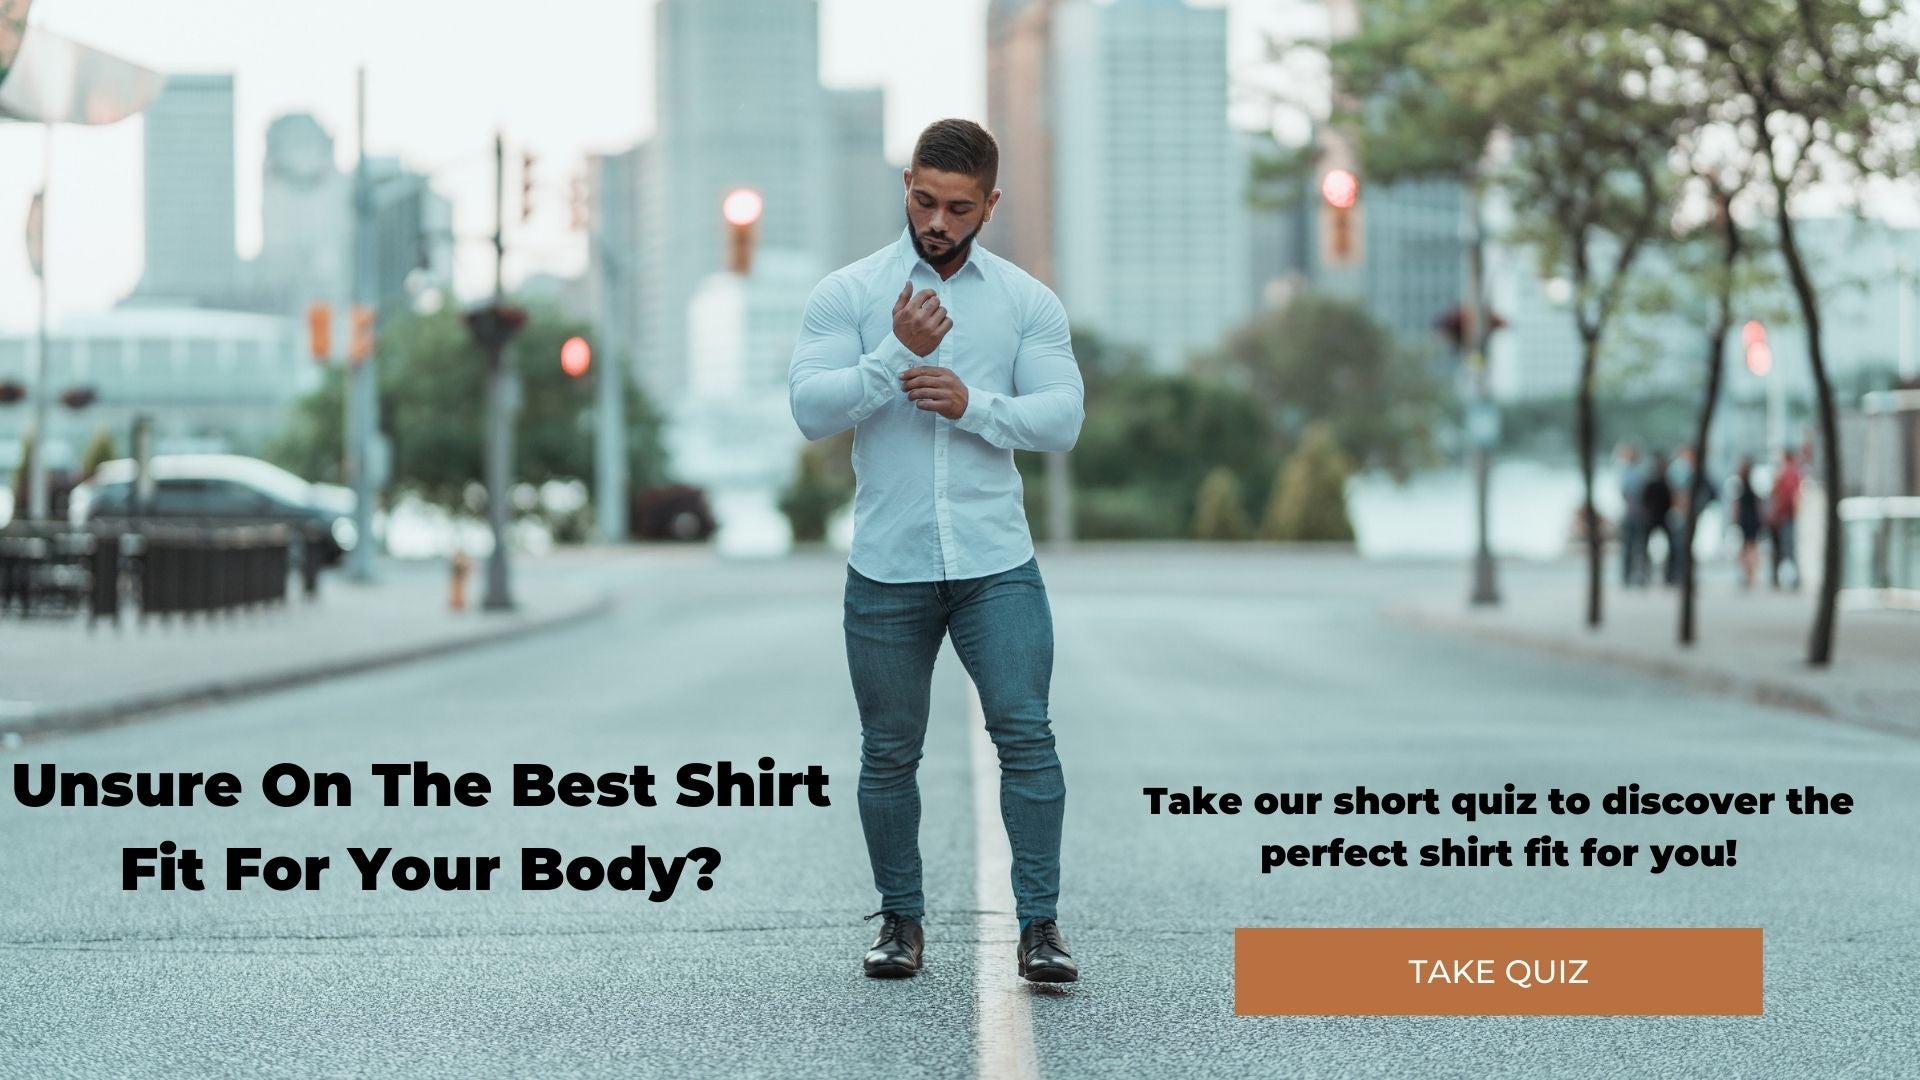 Athletic Fit Vs Slim Fit  Whats The Difference  Athletic Fit Clothing   Tapered Menswear